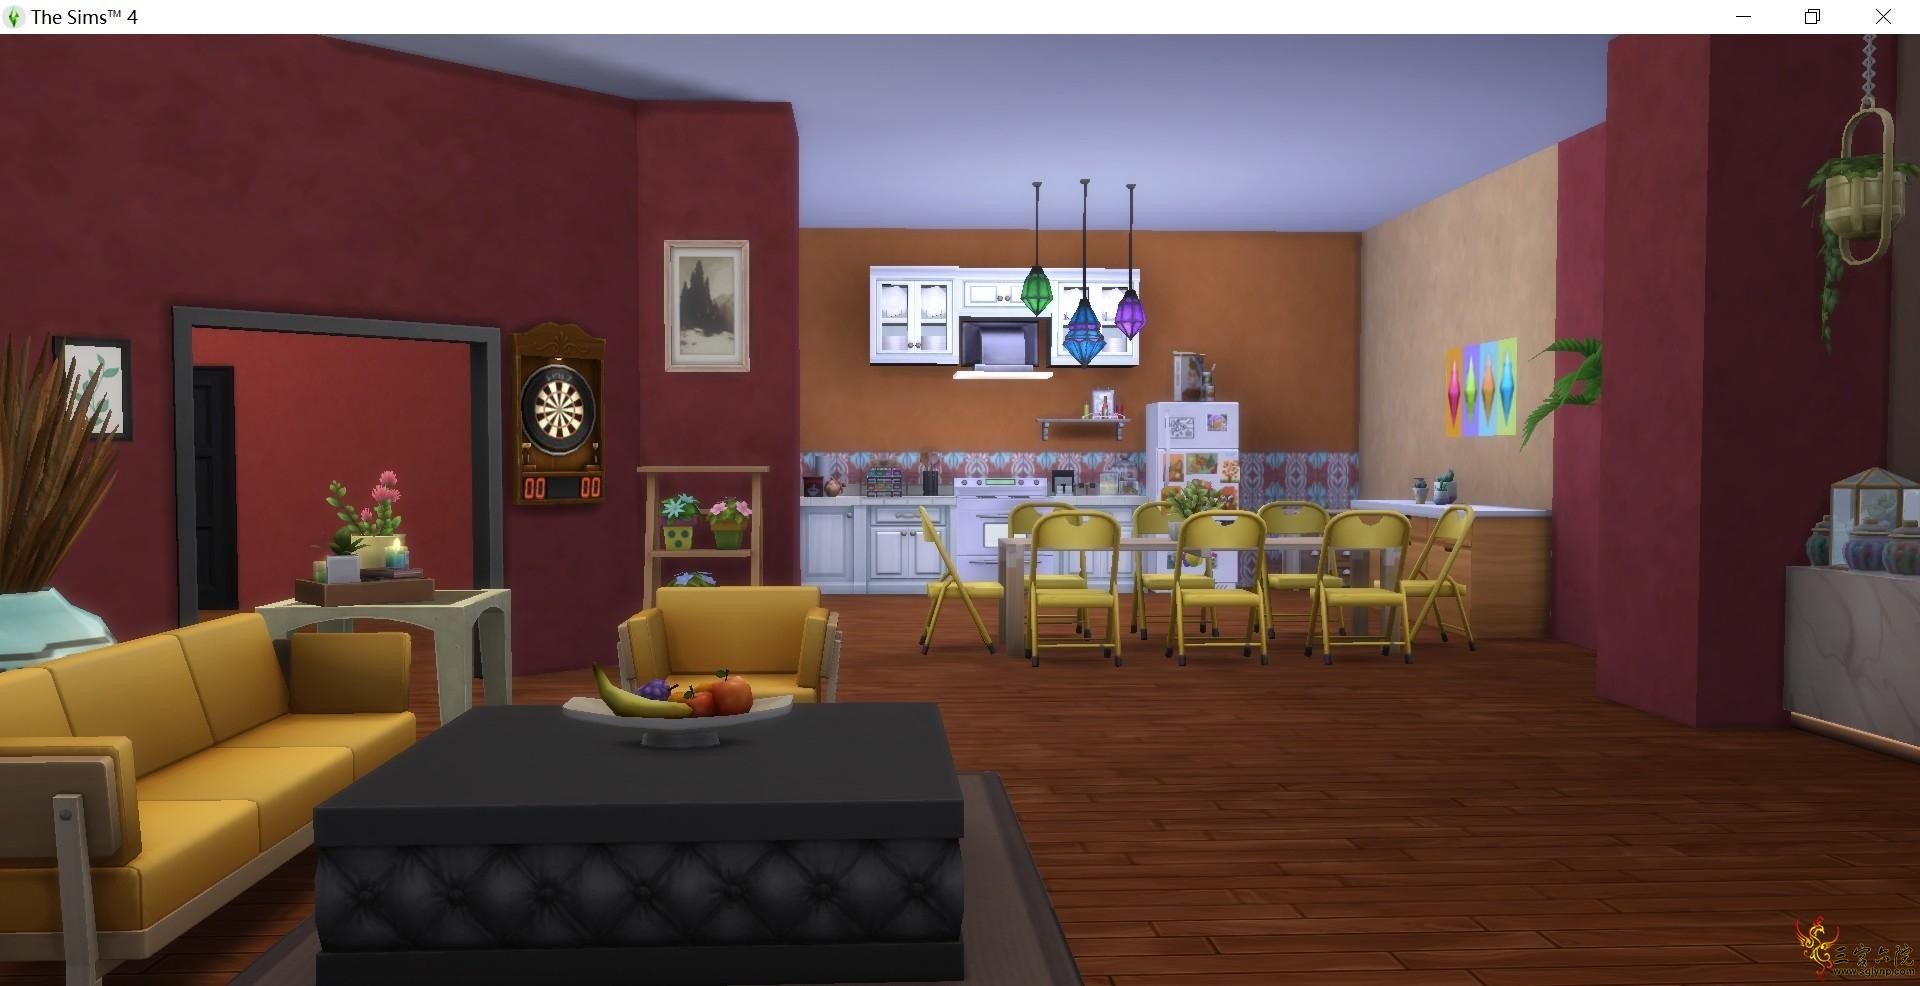 The Sims 4 2021-02-28 11_40_44.png